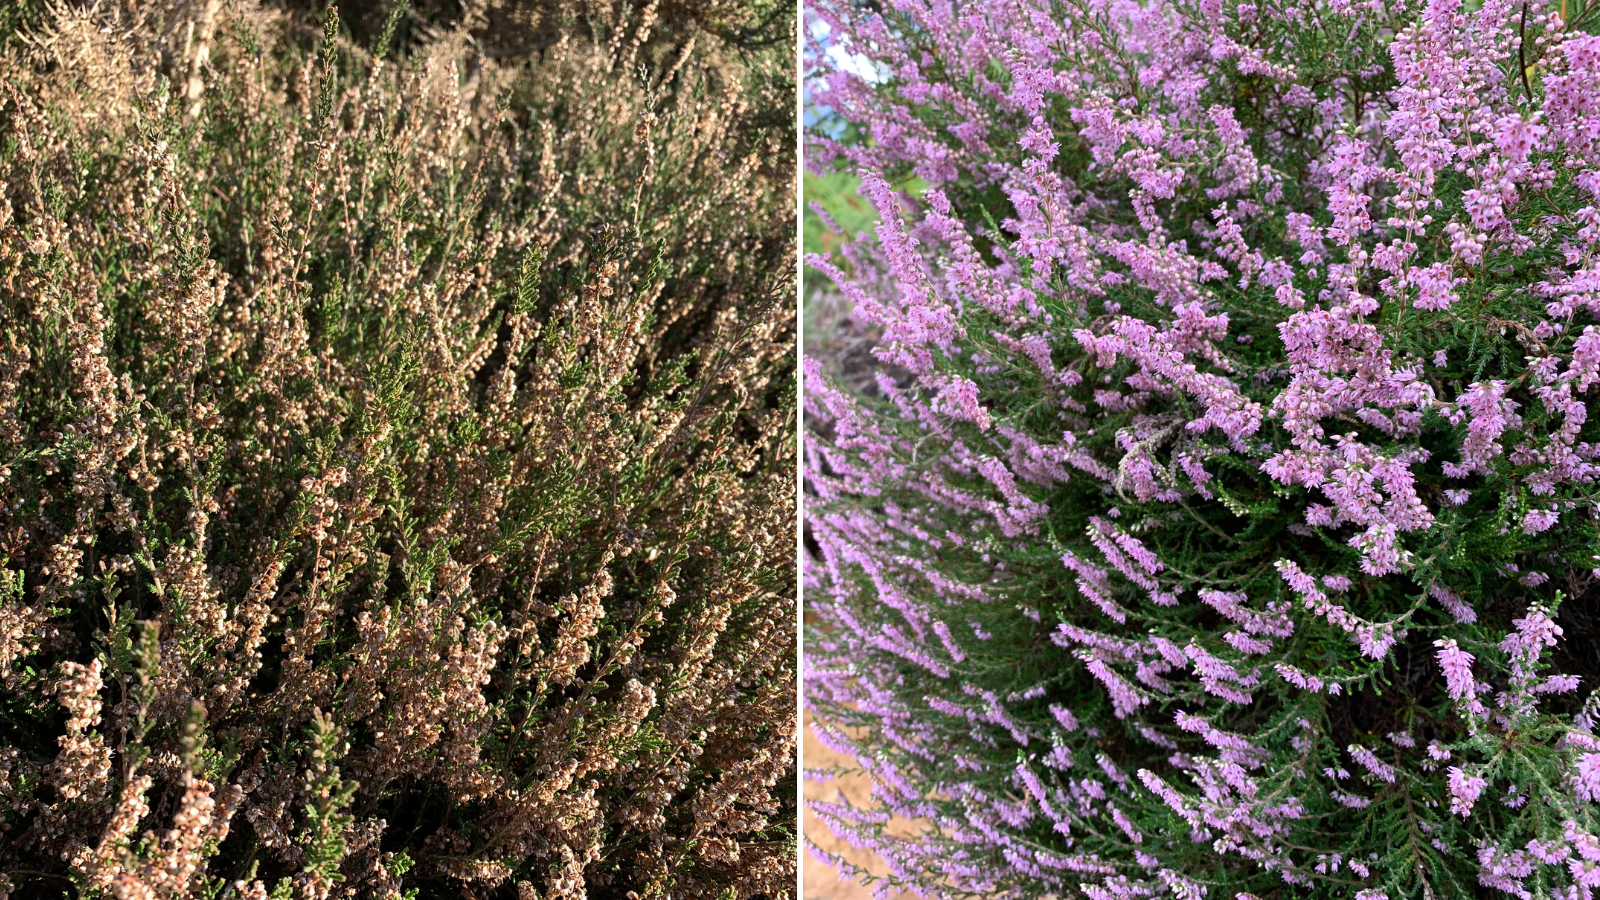 Two photos of Common Heather. On the left in winter, with dry flower heads. On the right in summer, with pinky-purple flowers.